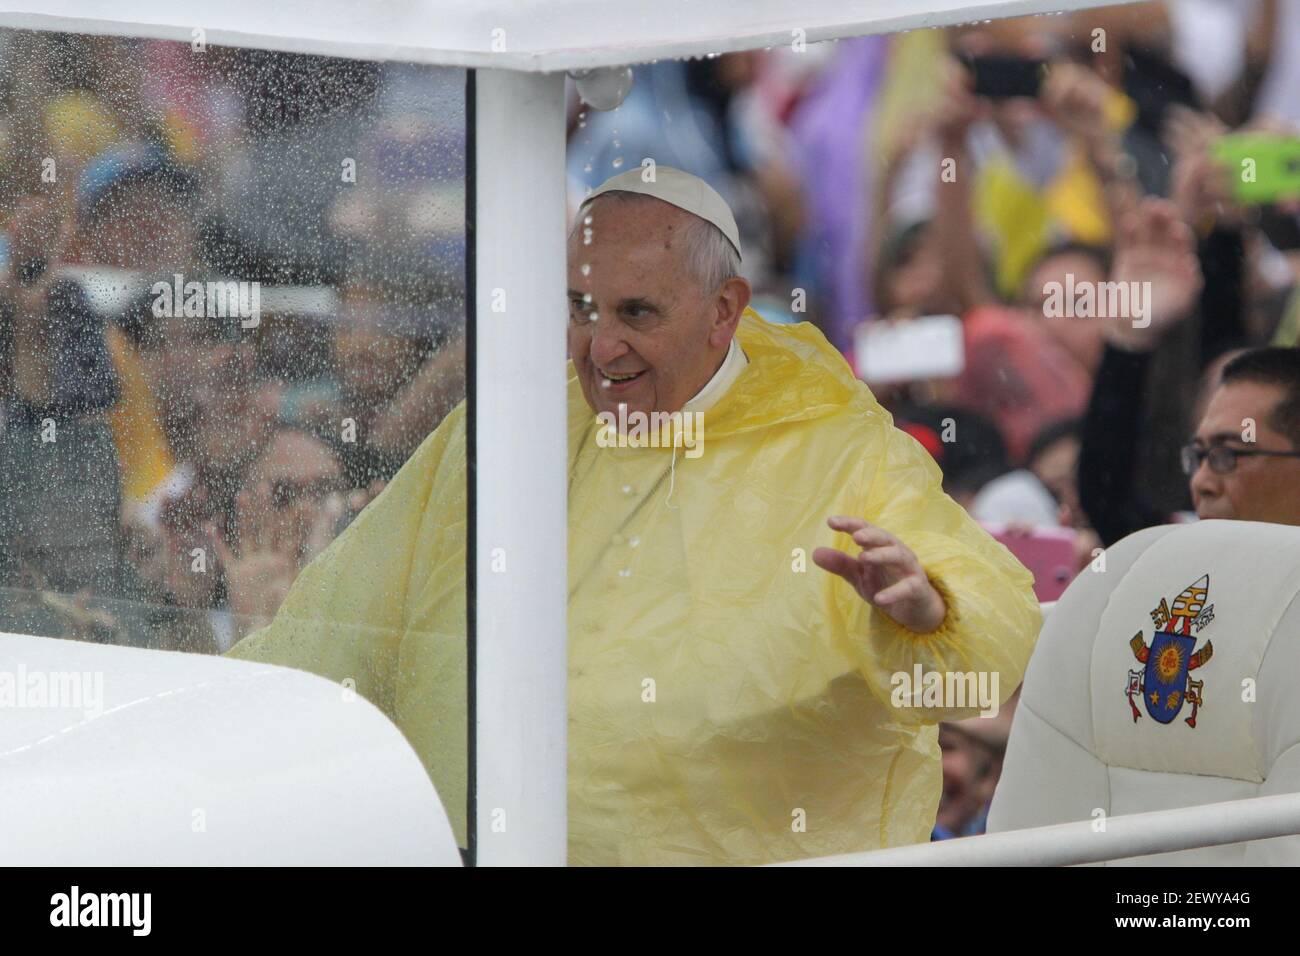 Manila, Philippines - Pope Francis greets the crowd before his closing mass at the Quirino Grandstand, Rizal Park on January 18, 2015. The mass was attended by an estimate of 6-7 million people. Photo by Mark Cristino. (Photo by Mark Cristino / Pacific Press) *** Please Use Credit from Credit Field *** Stock Photo